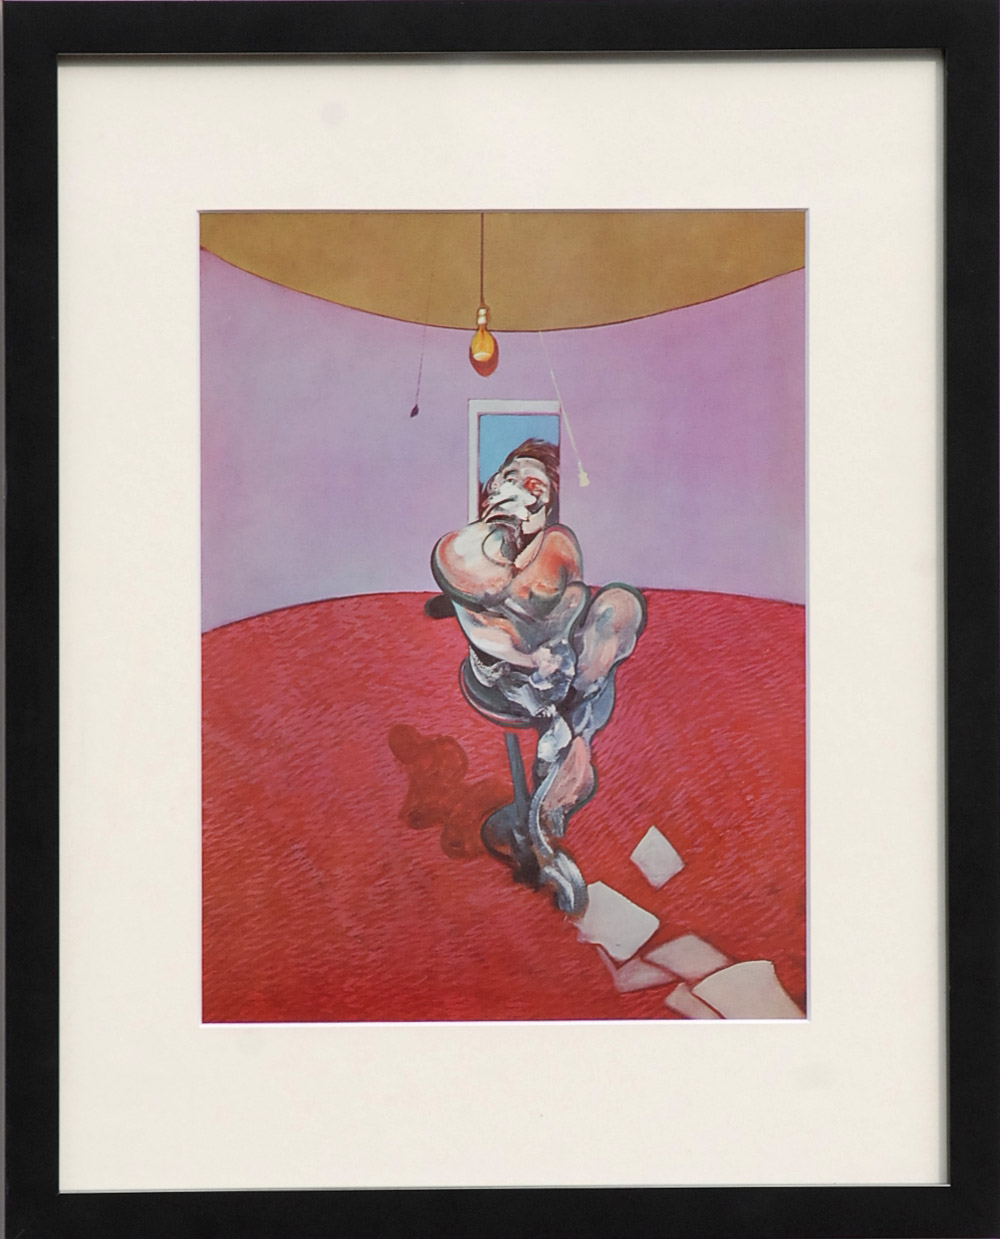 FRANCIS BACON, lithograph, George Dyer, 1966, printed by Maeght, 33cm x 25cm, framed and glazed.